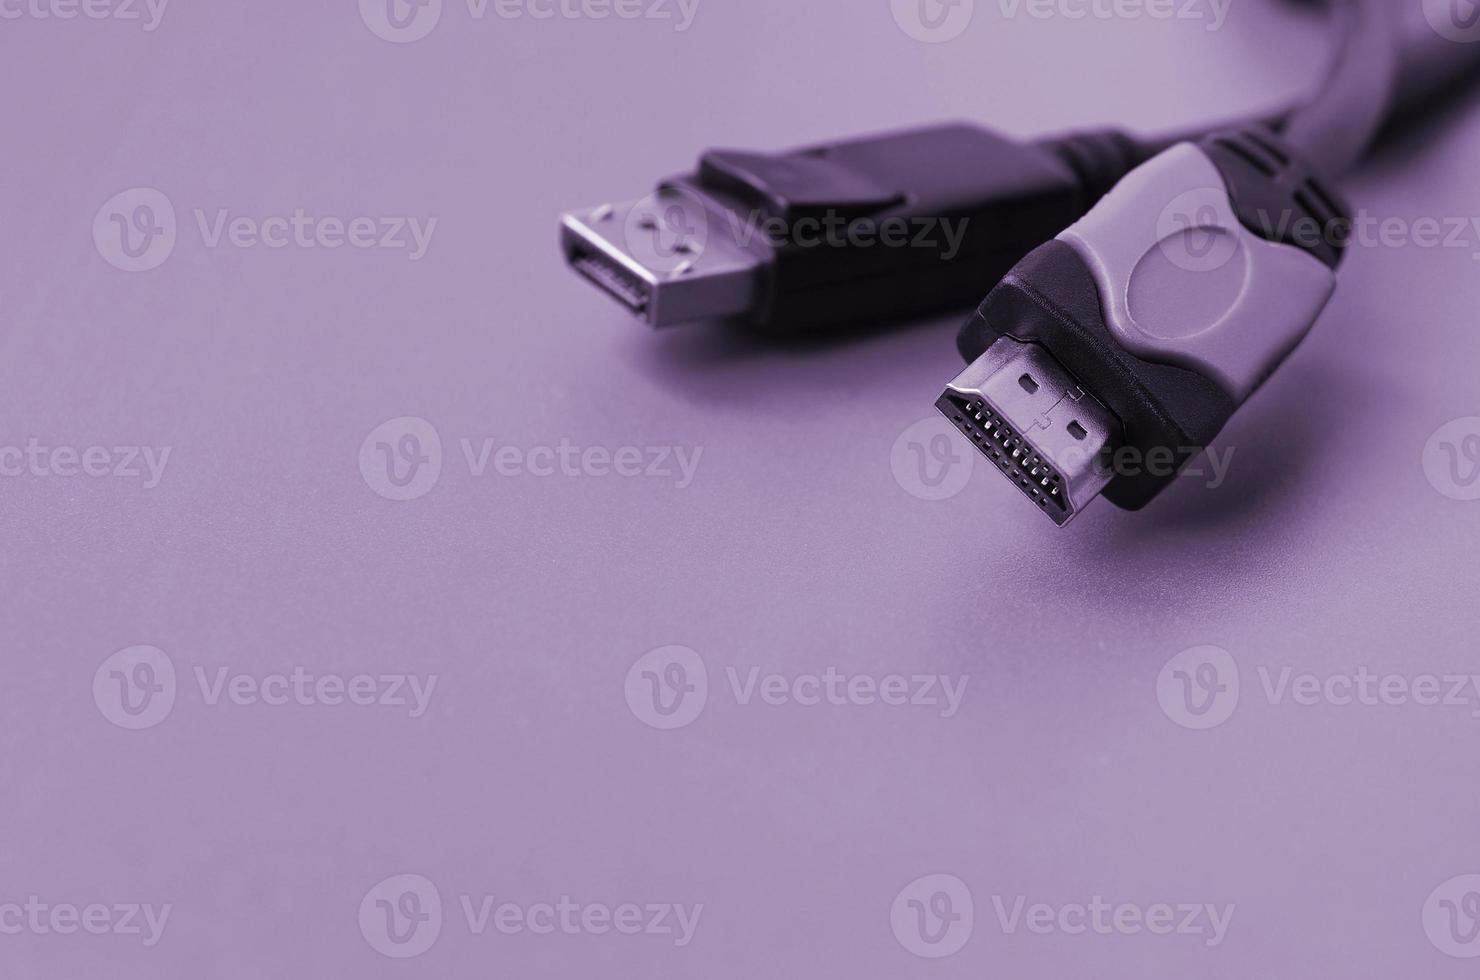 Audio video HDMI computer cable plug and 20-pin male DisplayPort gold plated connector for a flawless connection on purple backdrop photo